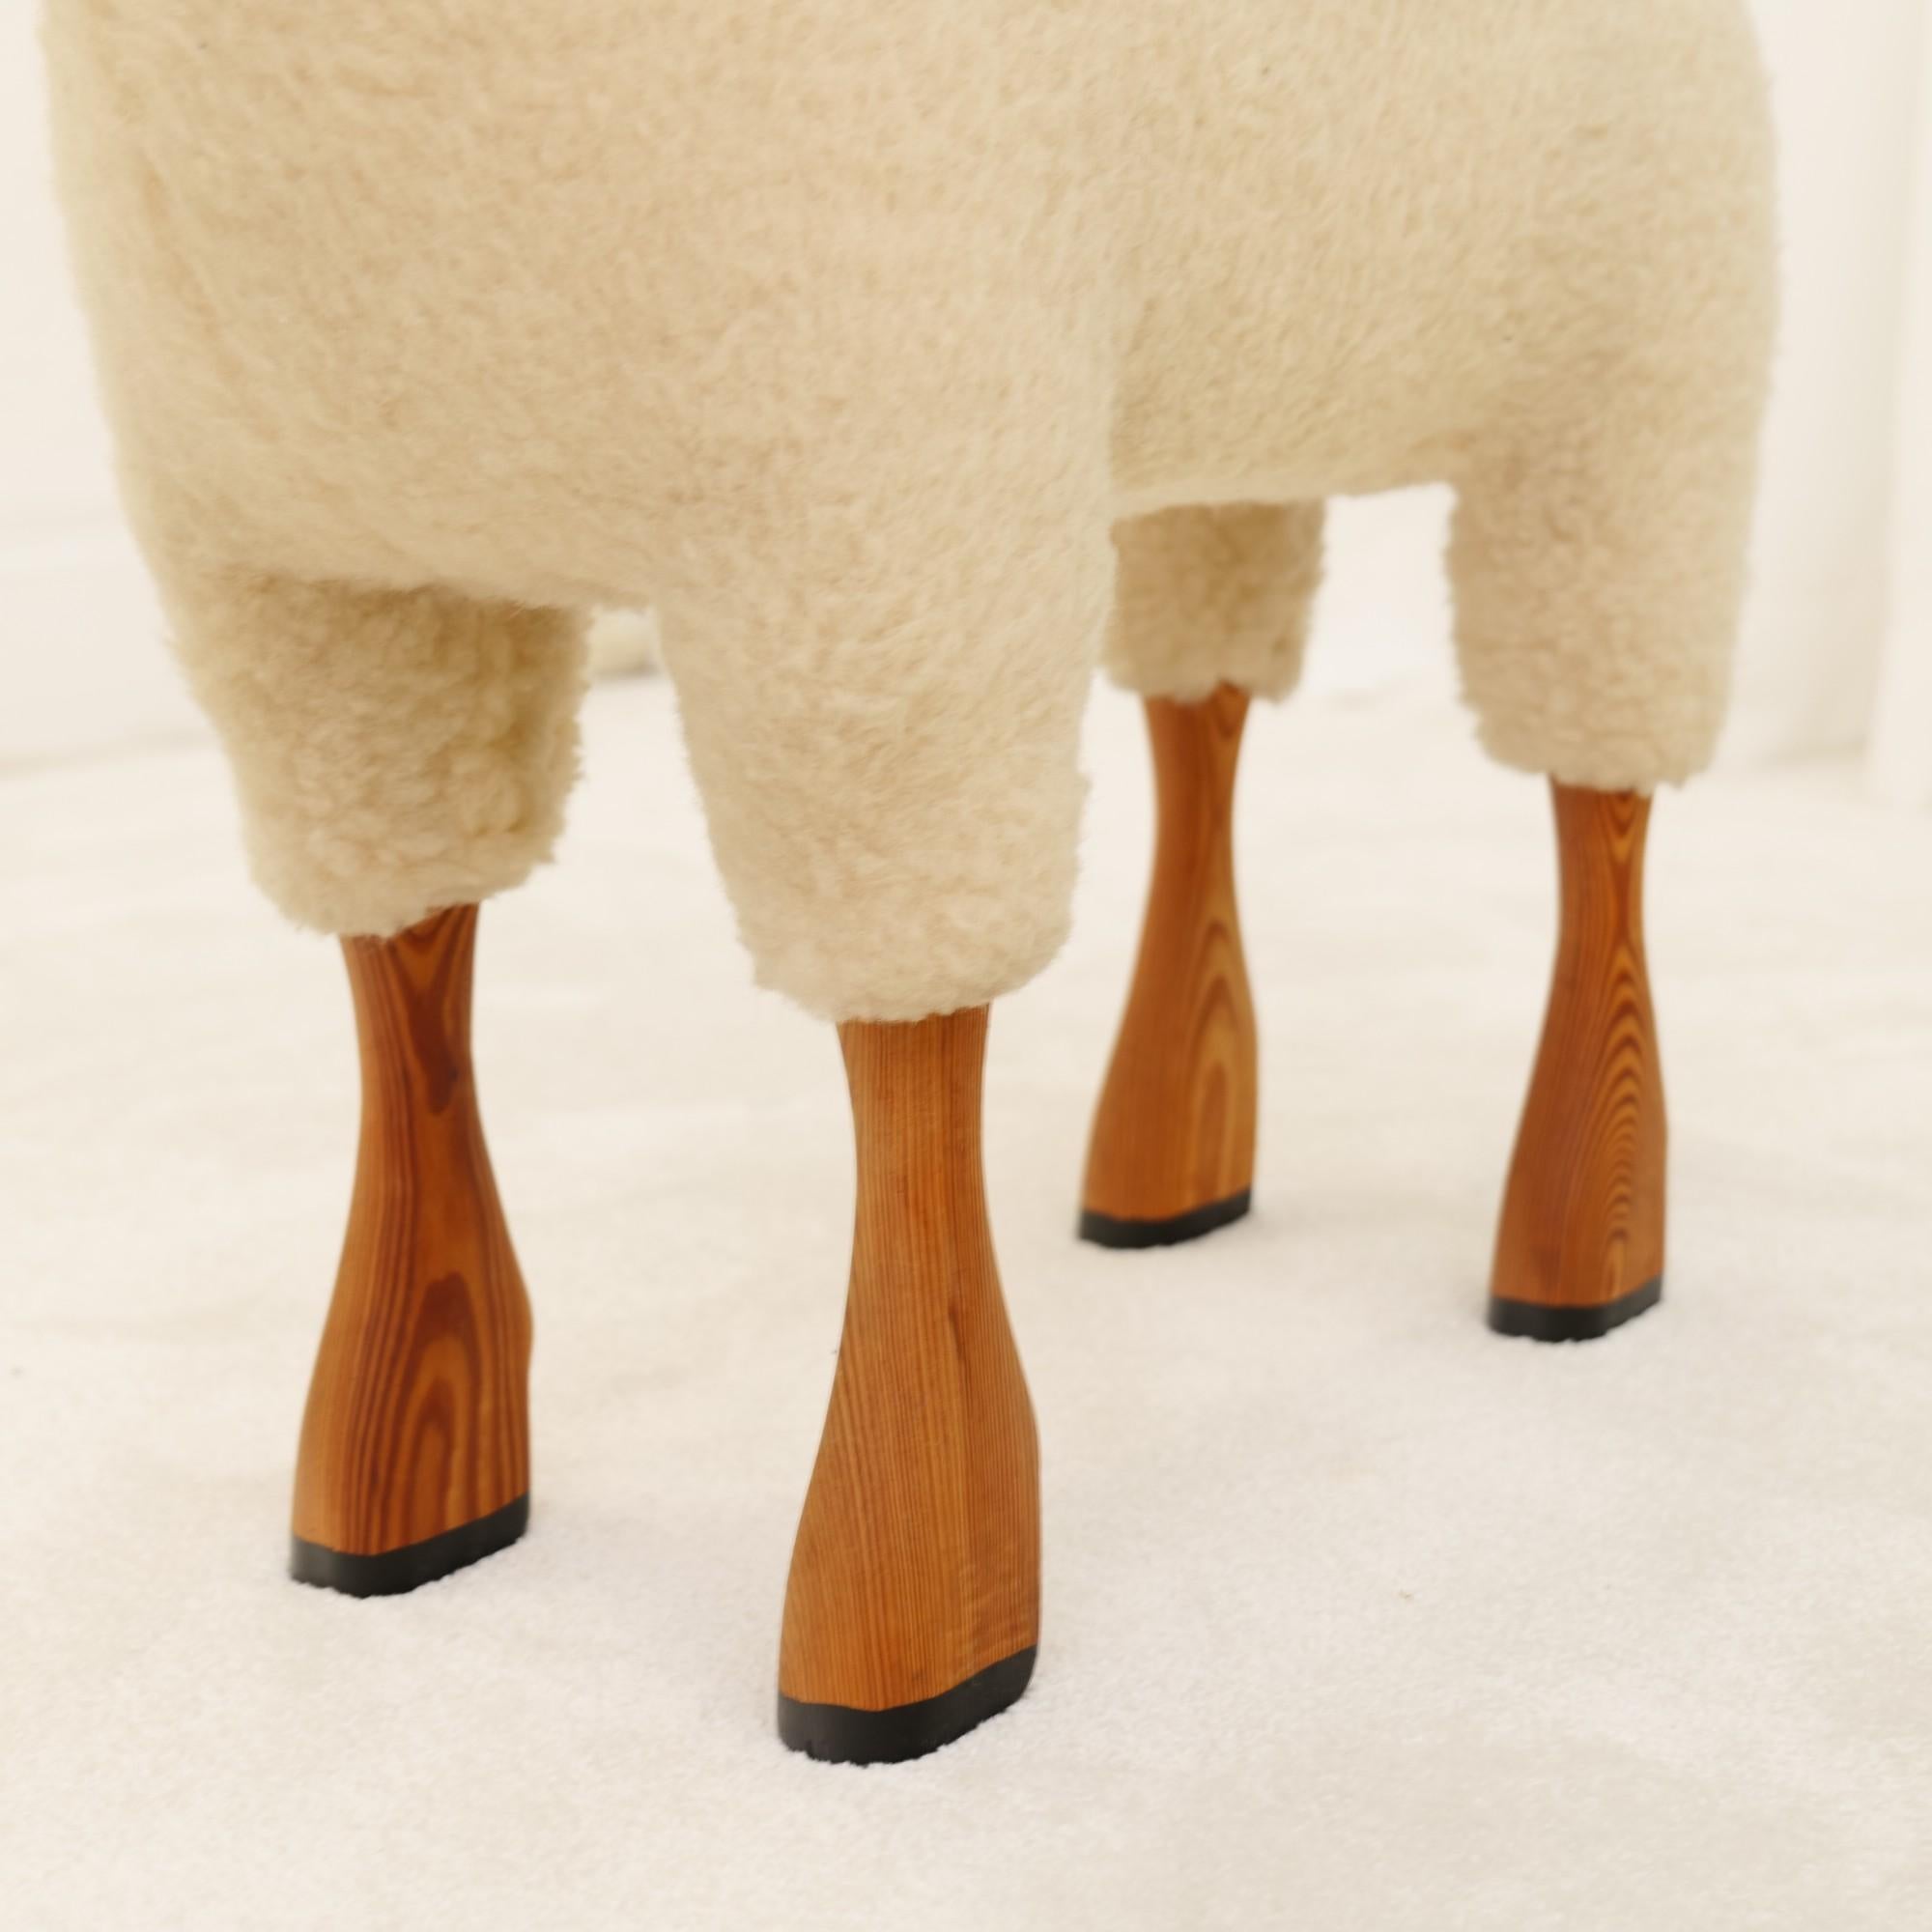 Late 20th Century vintage sheep by Hanns Peter Krafft schaf for Mayr wool - 1970s Germany